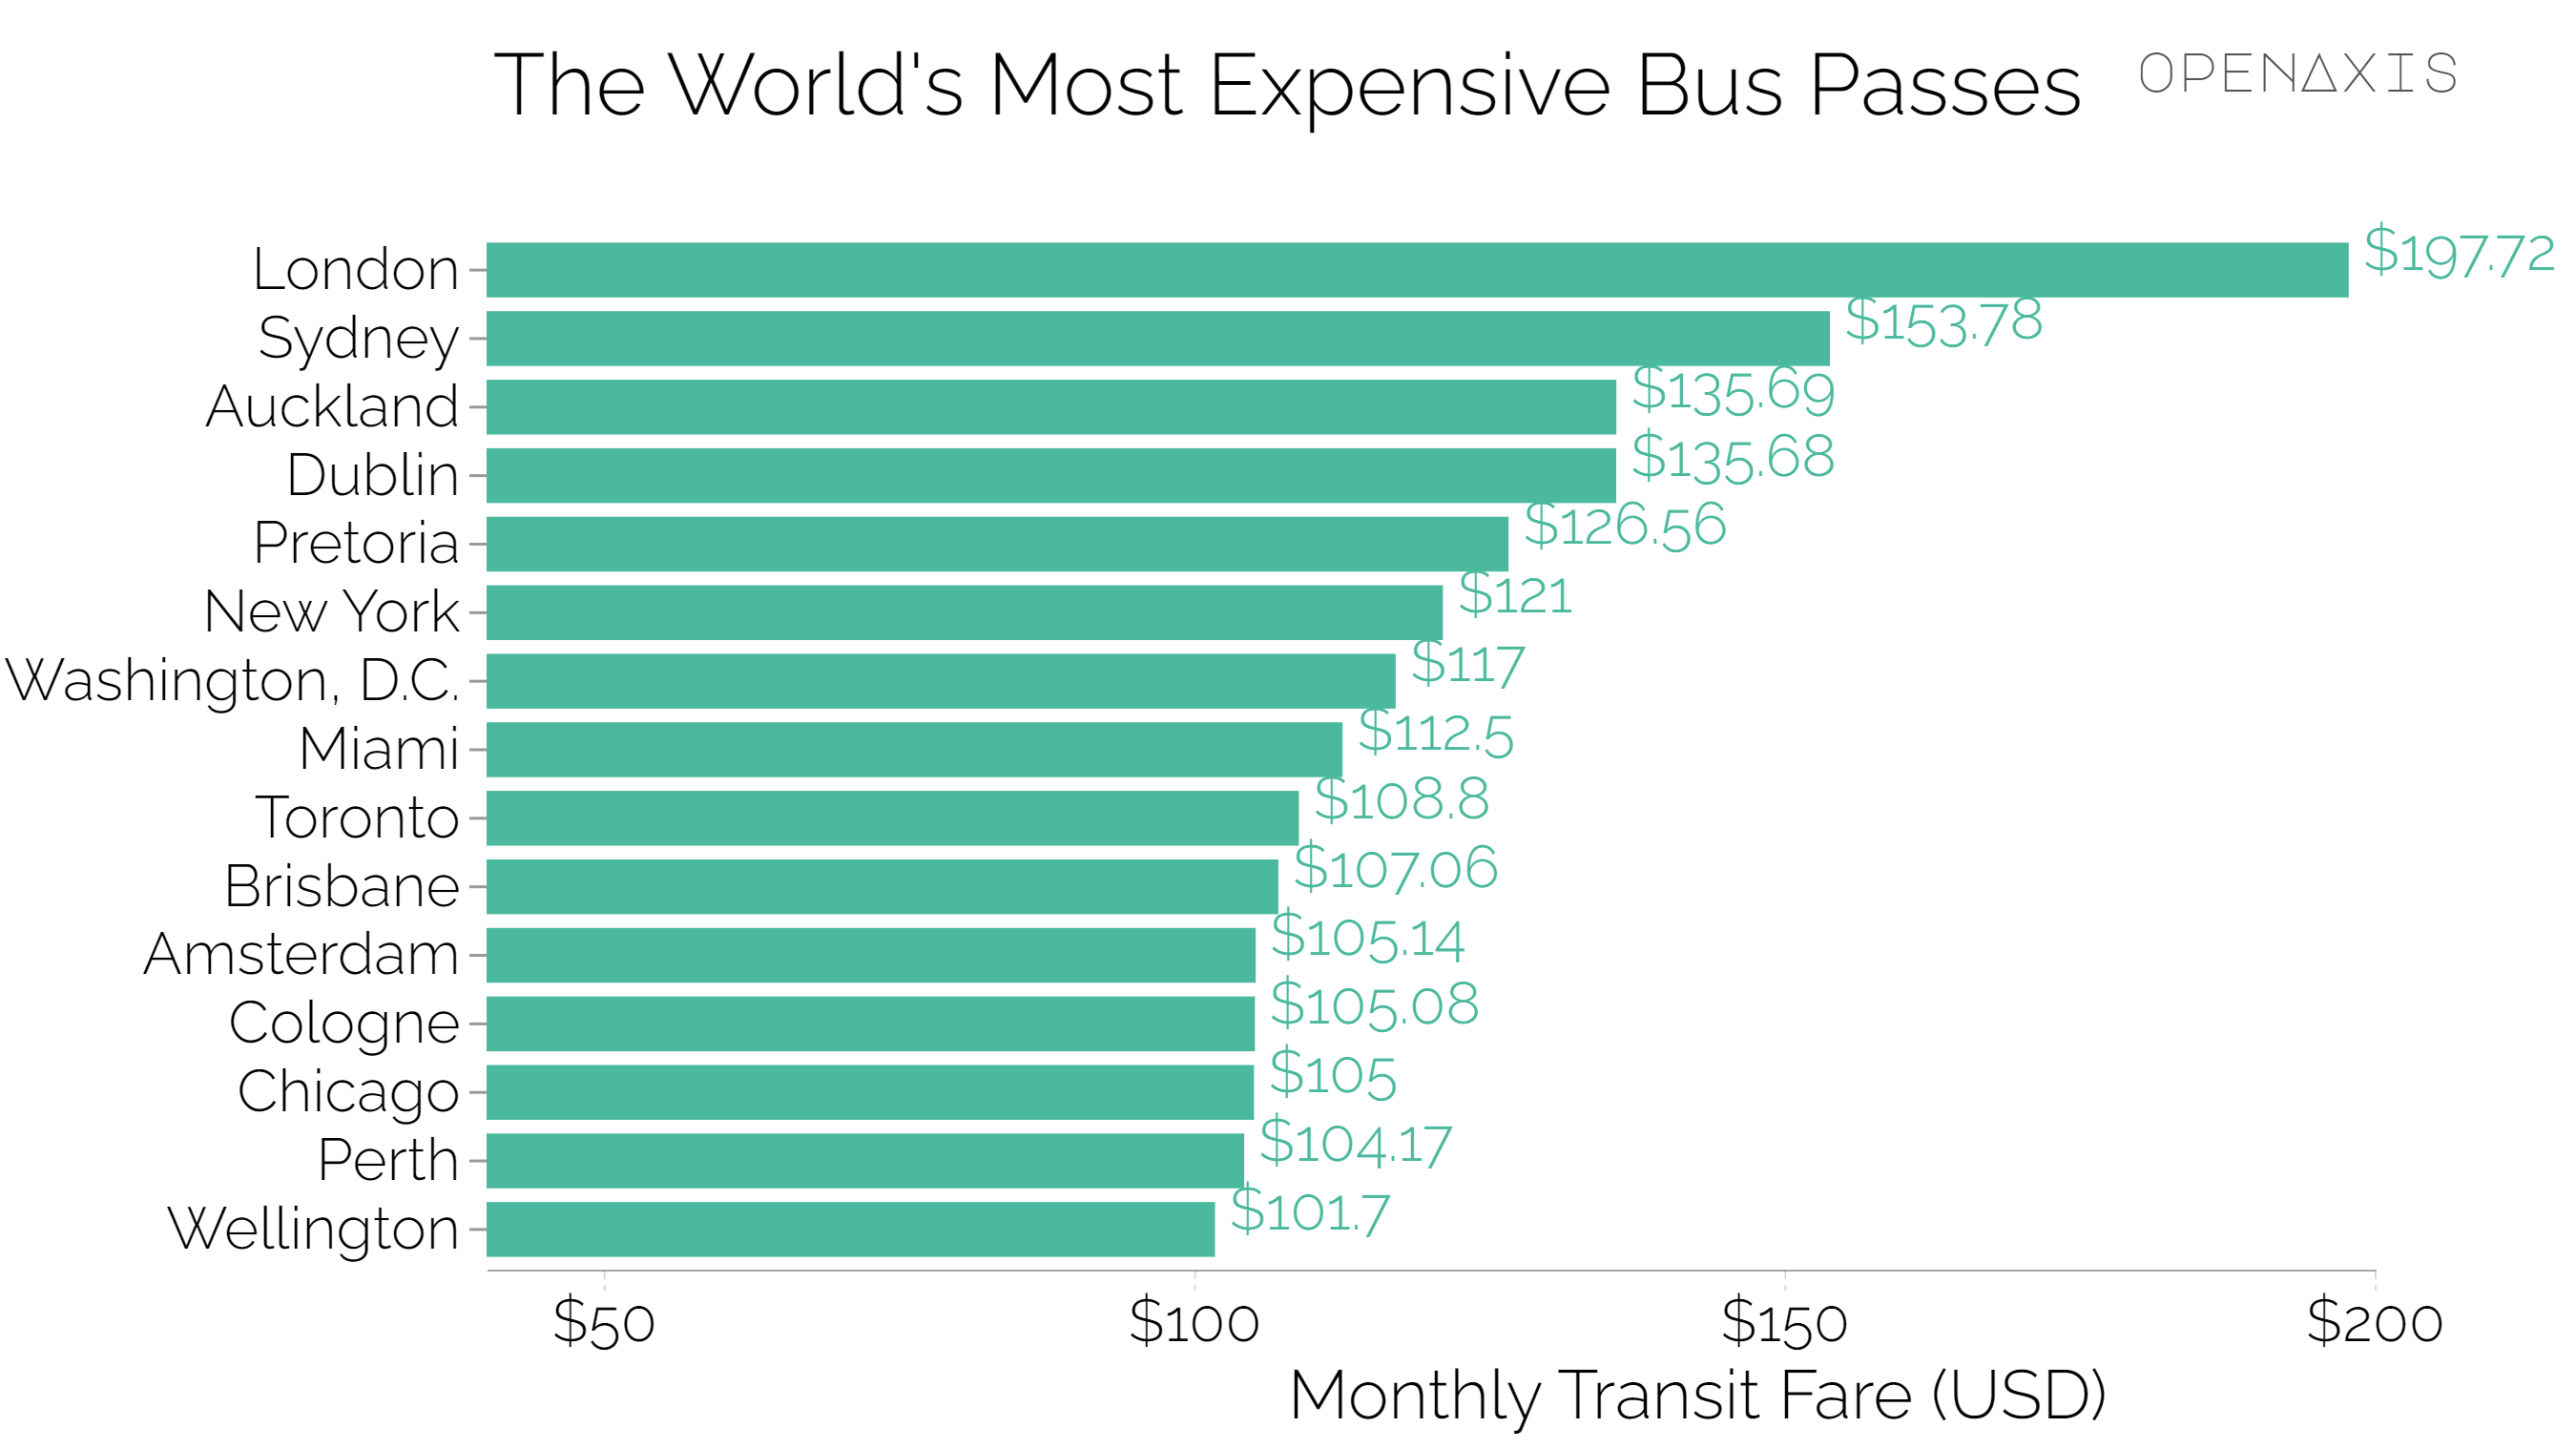 "The World's Most Expensive Bus Passes"